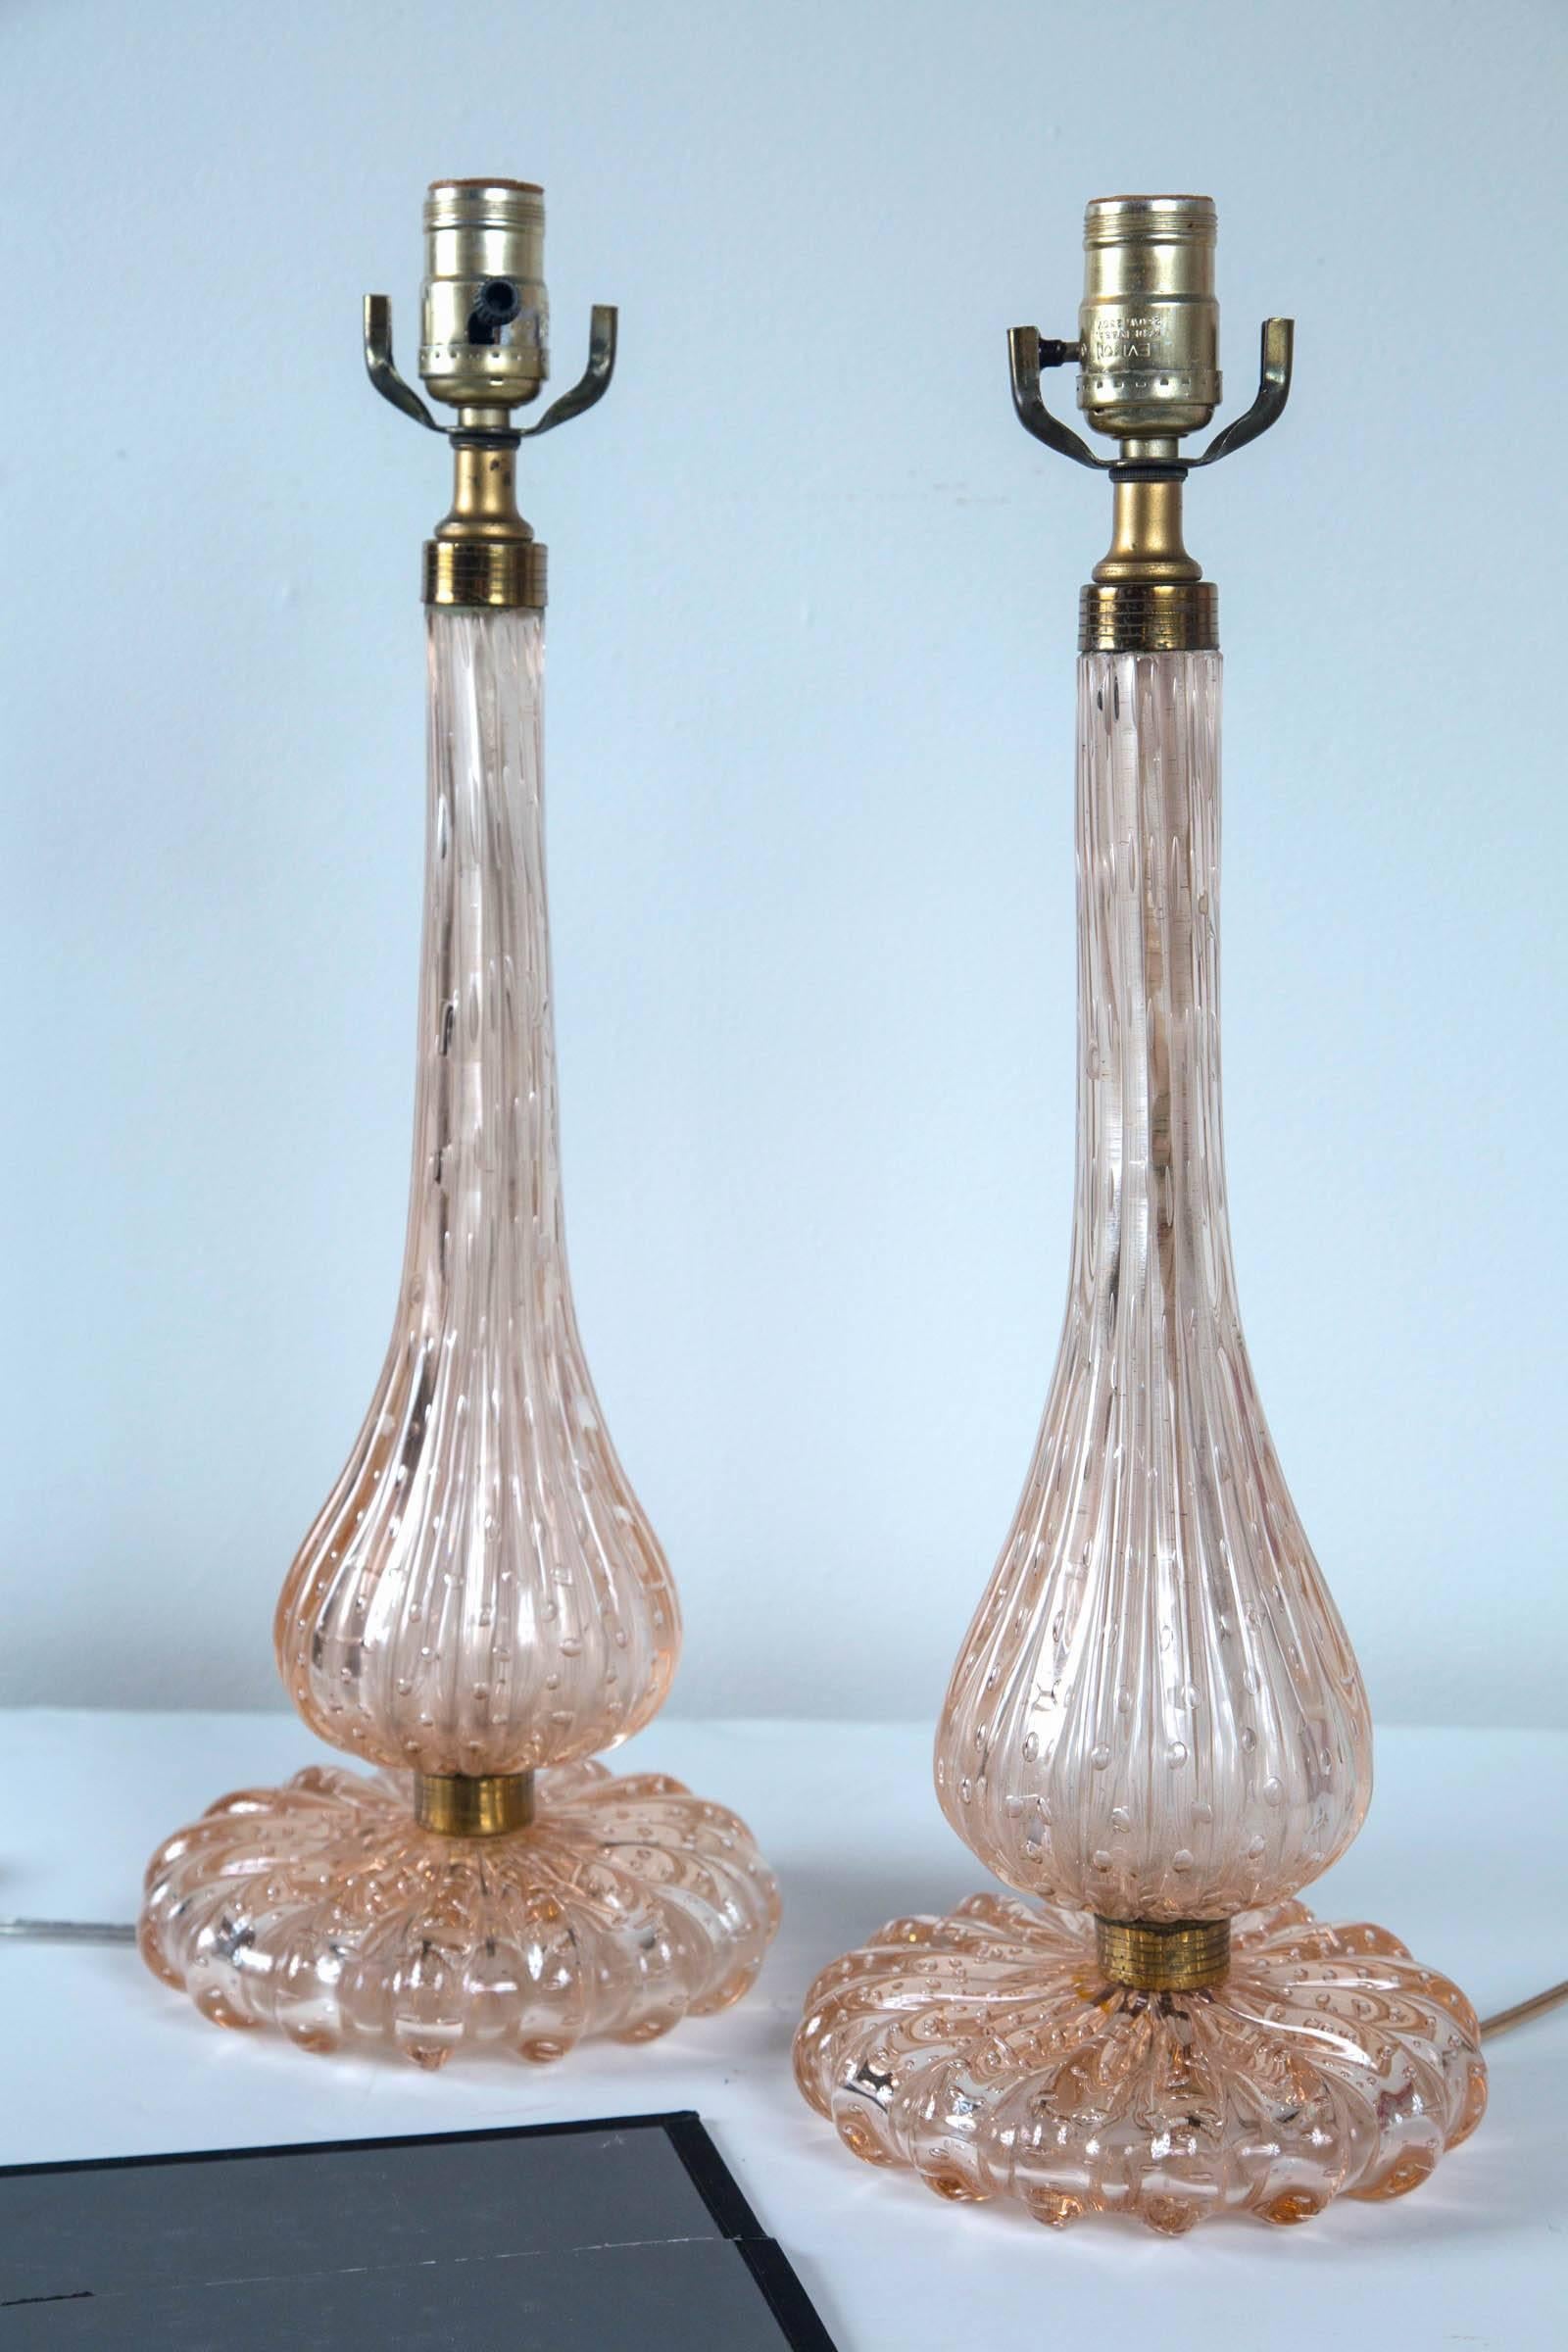 A very fine and rare pair of 1950s Italian Murano lamps in all original condition. Having the iconic internal bubble design with the subtle pastel pinkish color only seen in 1950s Italian art glass designer masterpieces.